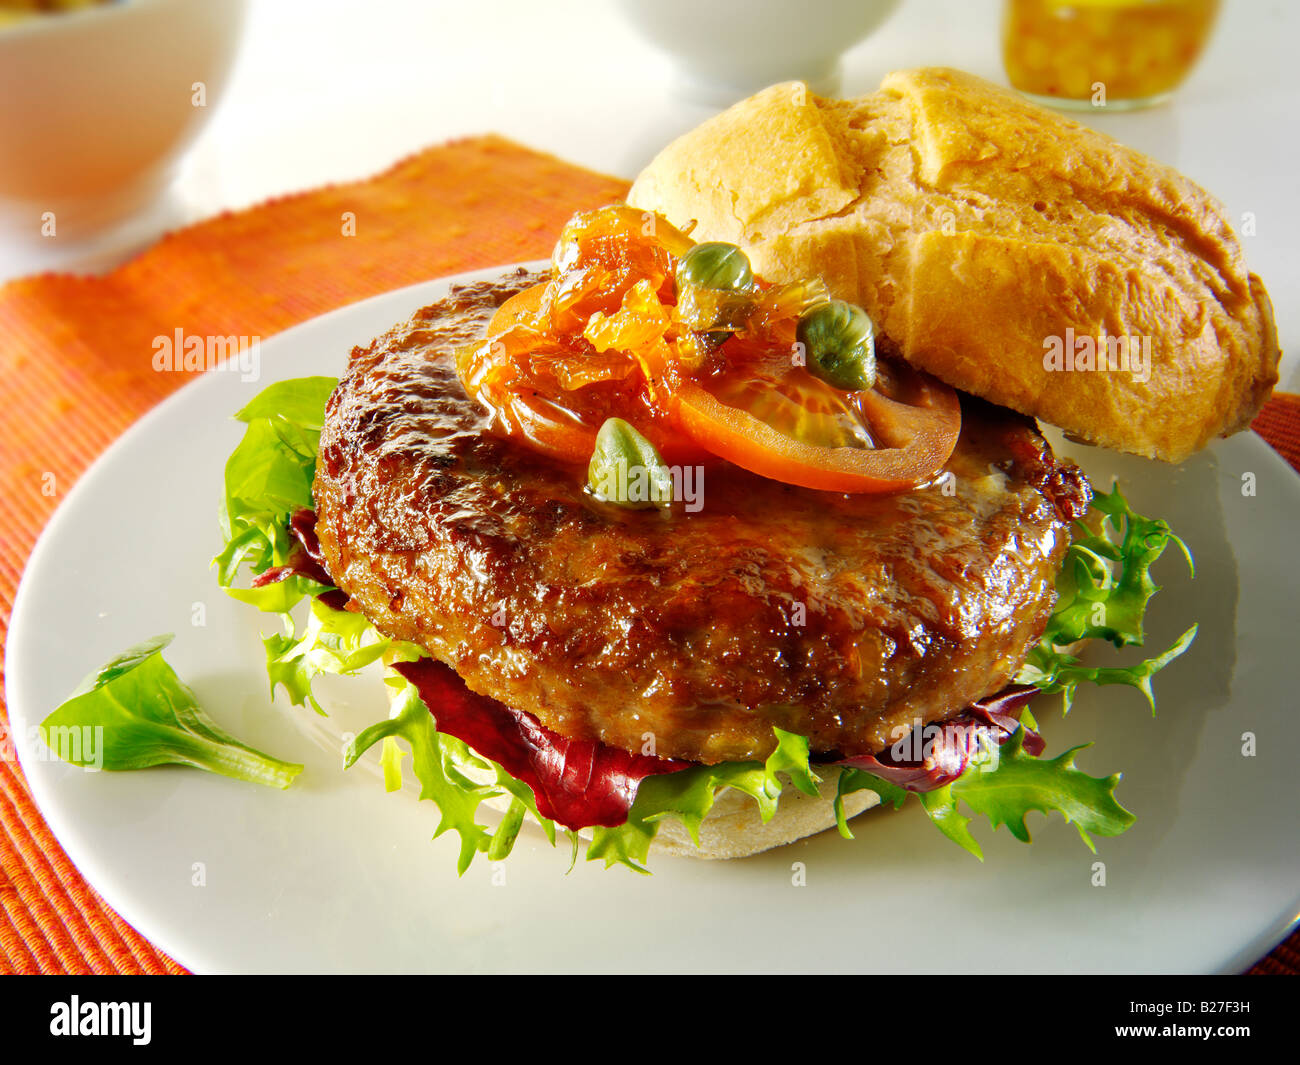 Organic beef burger with tomato relish and salad in a bun Stock Photo